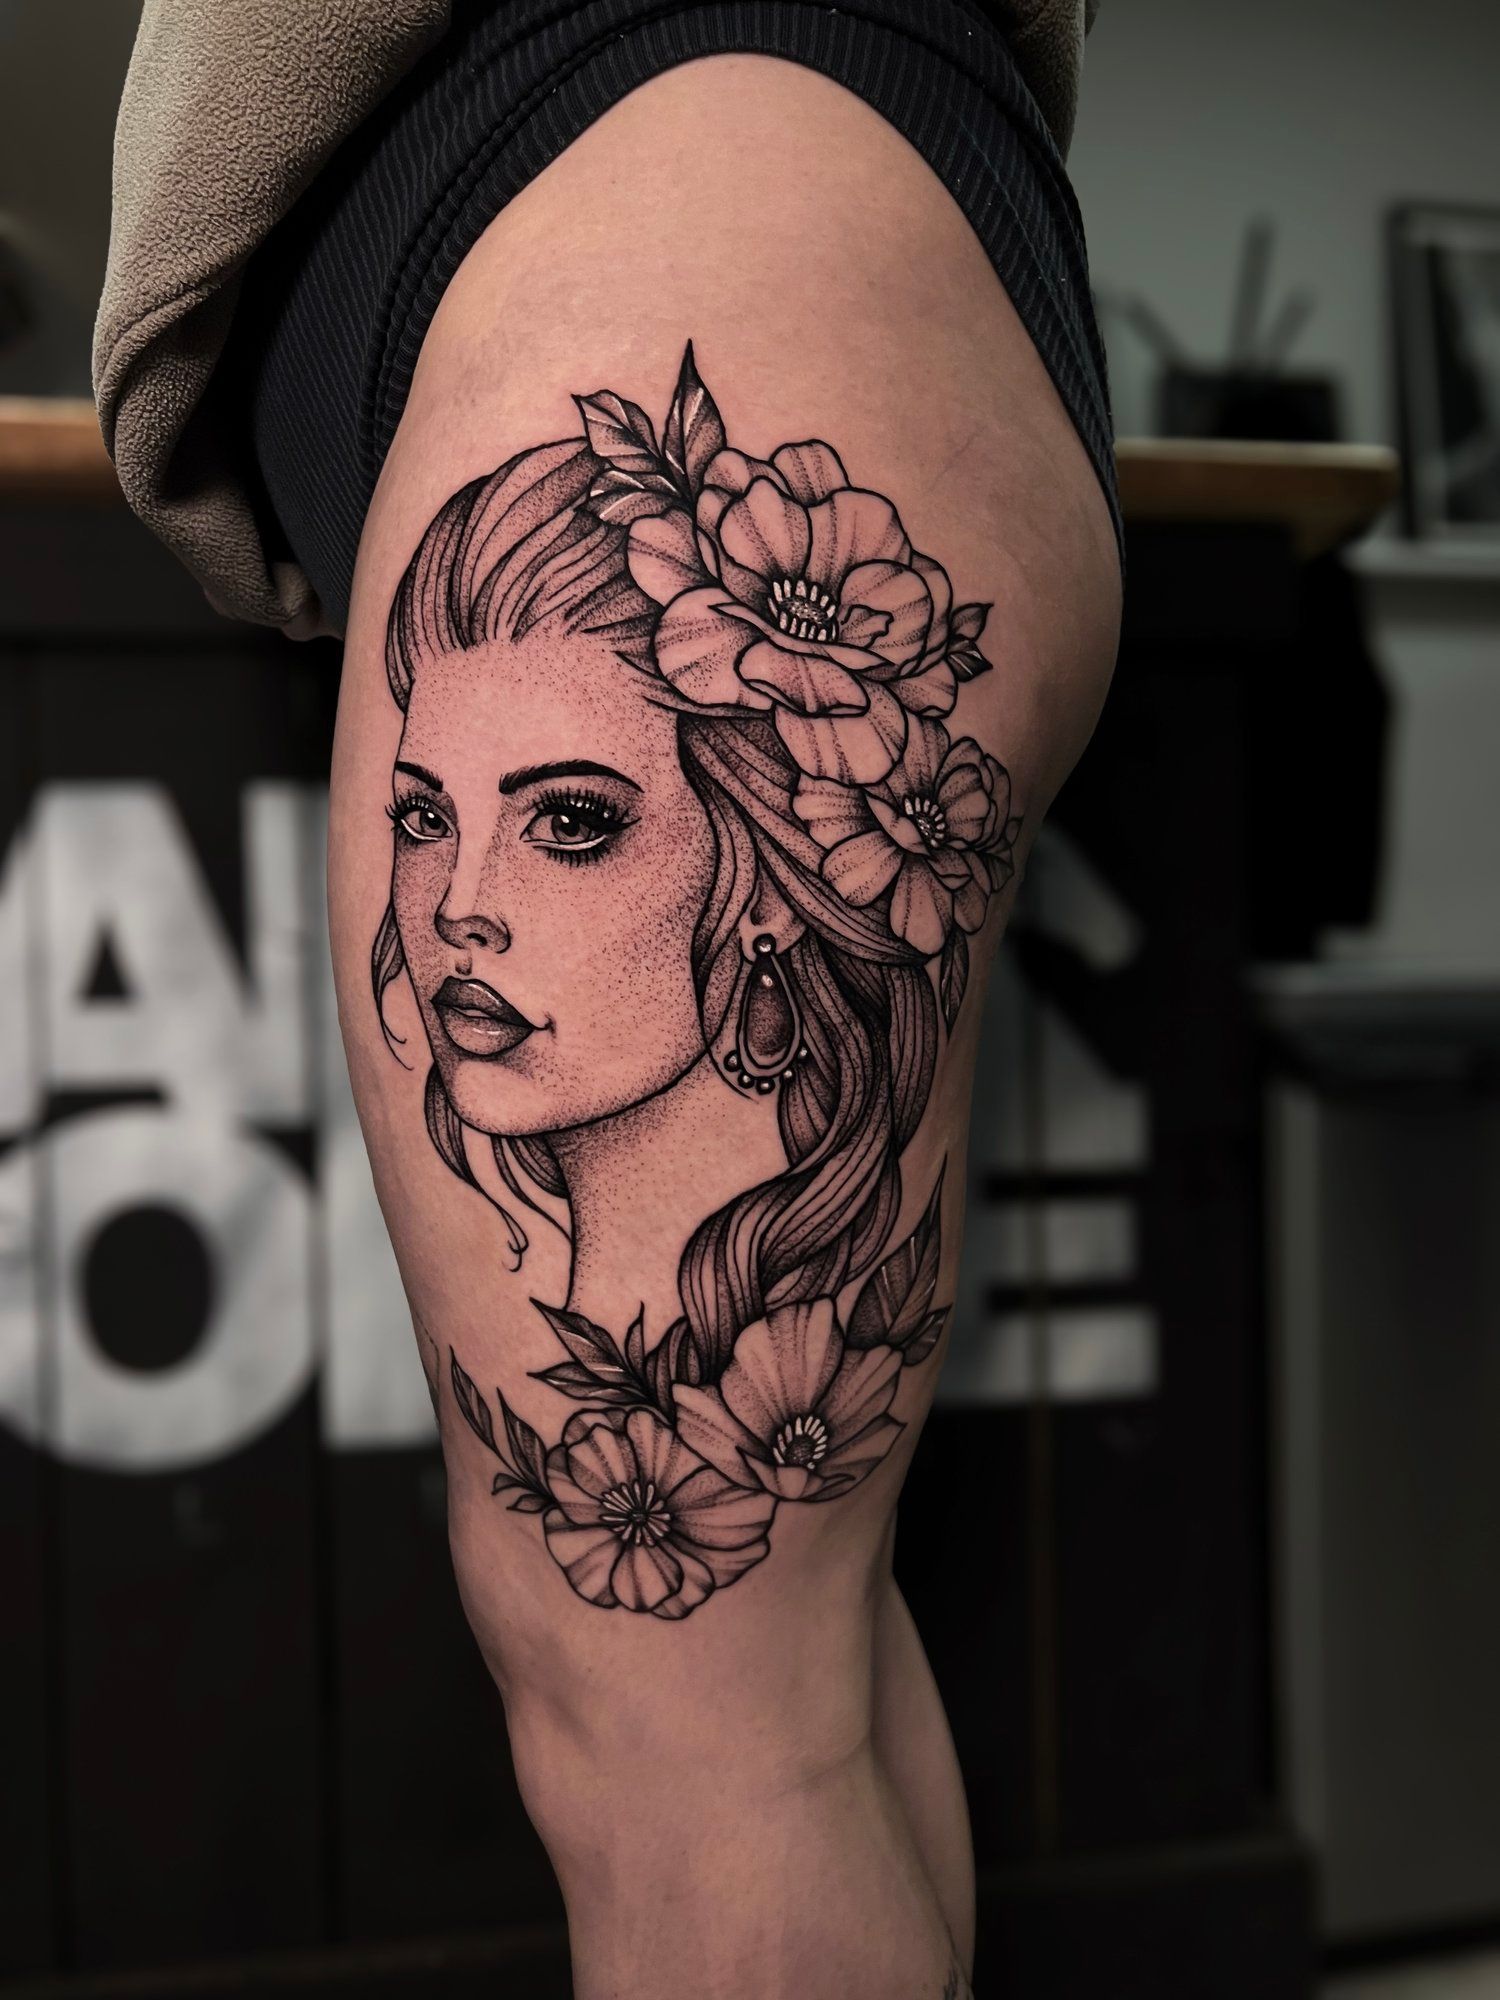 A woman has a tattoo of a woman 's face with flowers on her head.